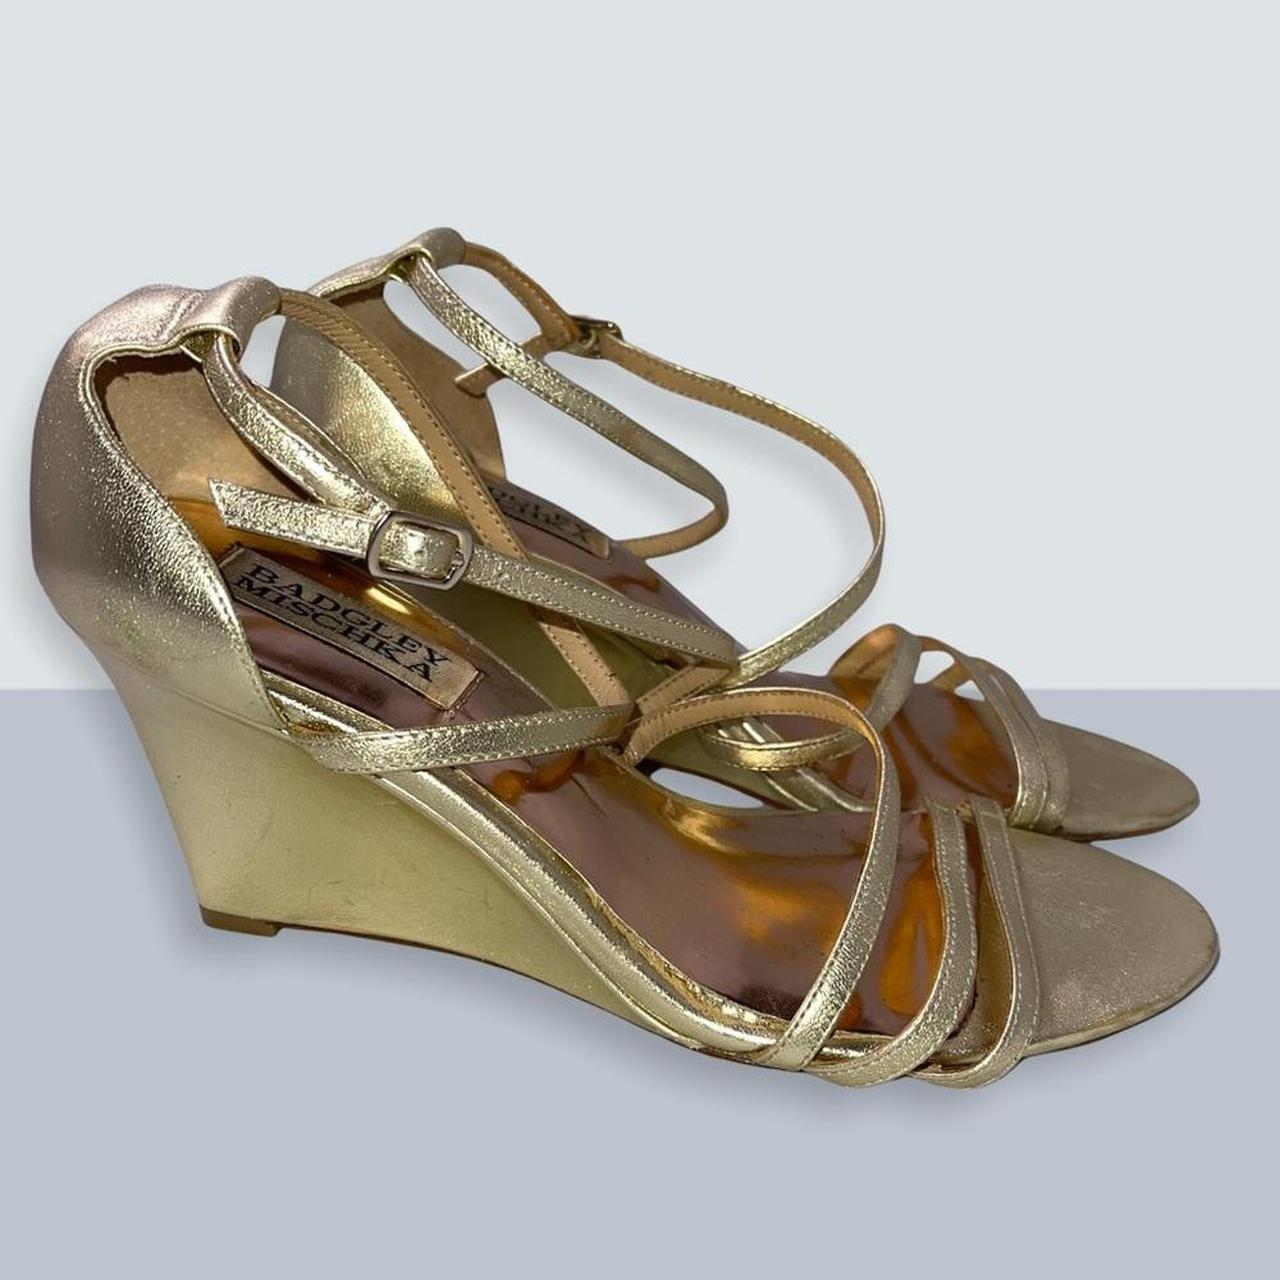 Product Image 1 - Badgley Mischka Gold Strappy Wedges.